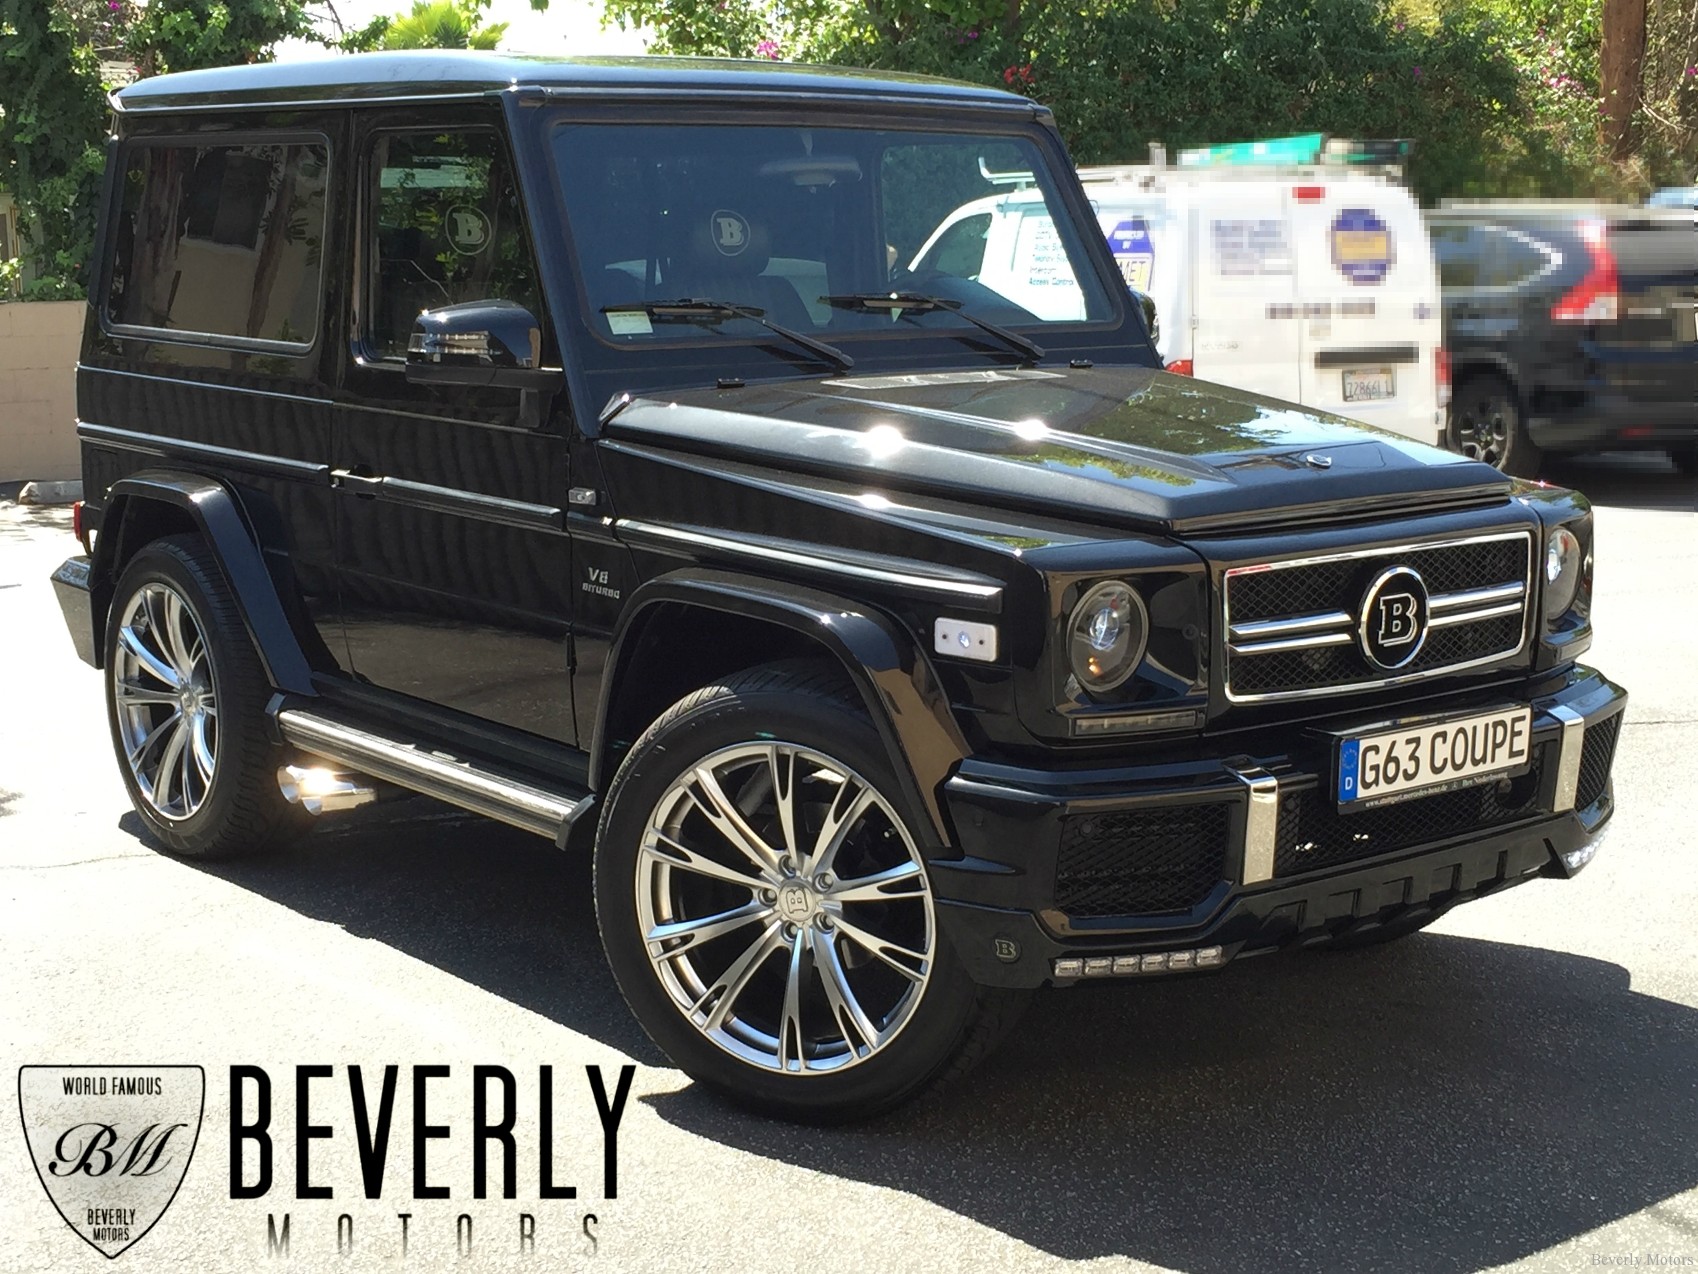 2001 Mercedes-Benz G320 Coupe BRABUS For Sale - Beverly ...